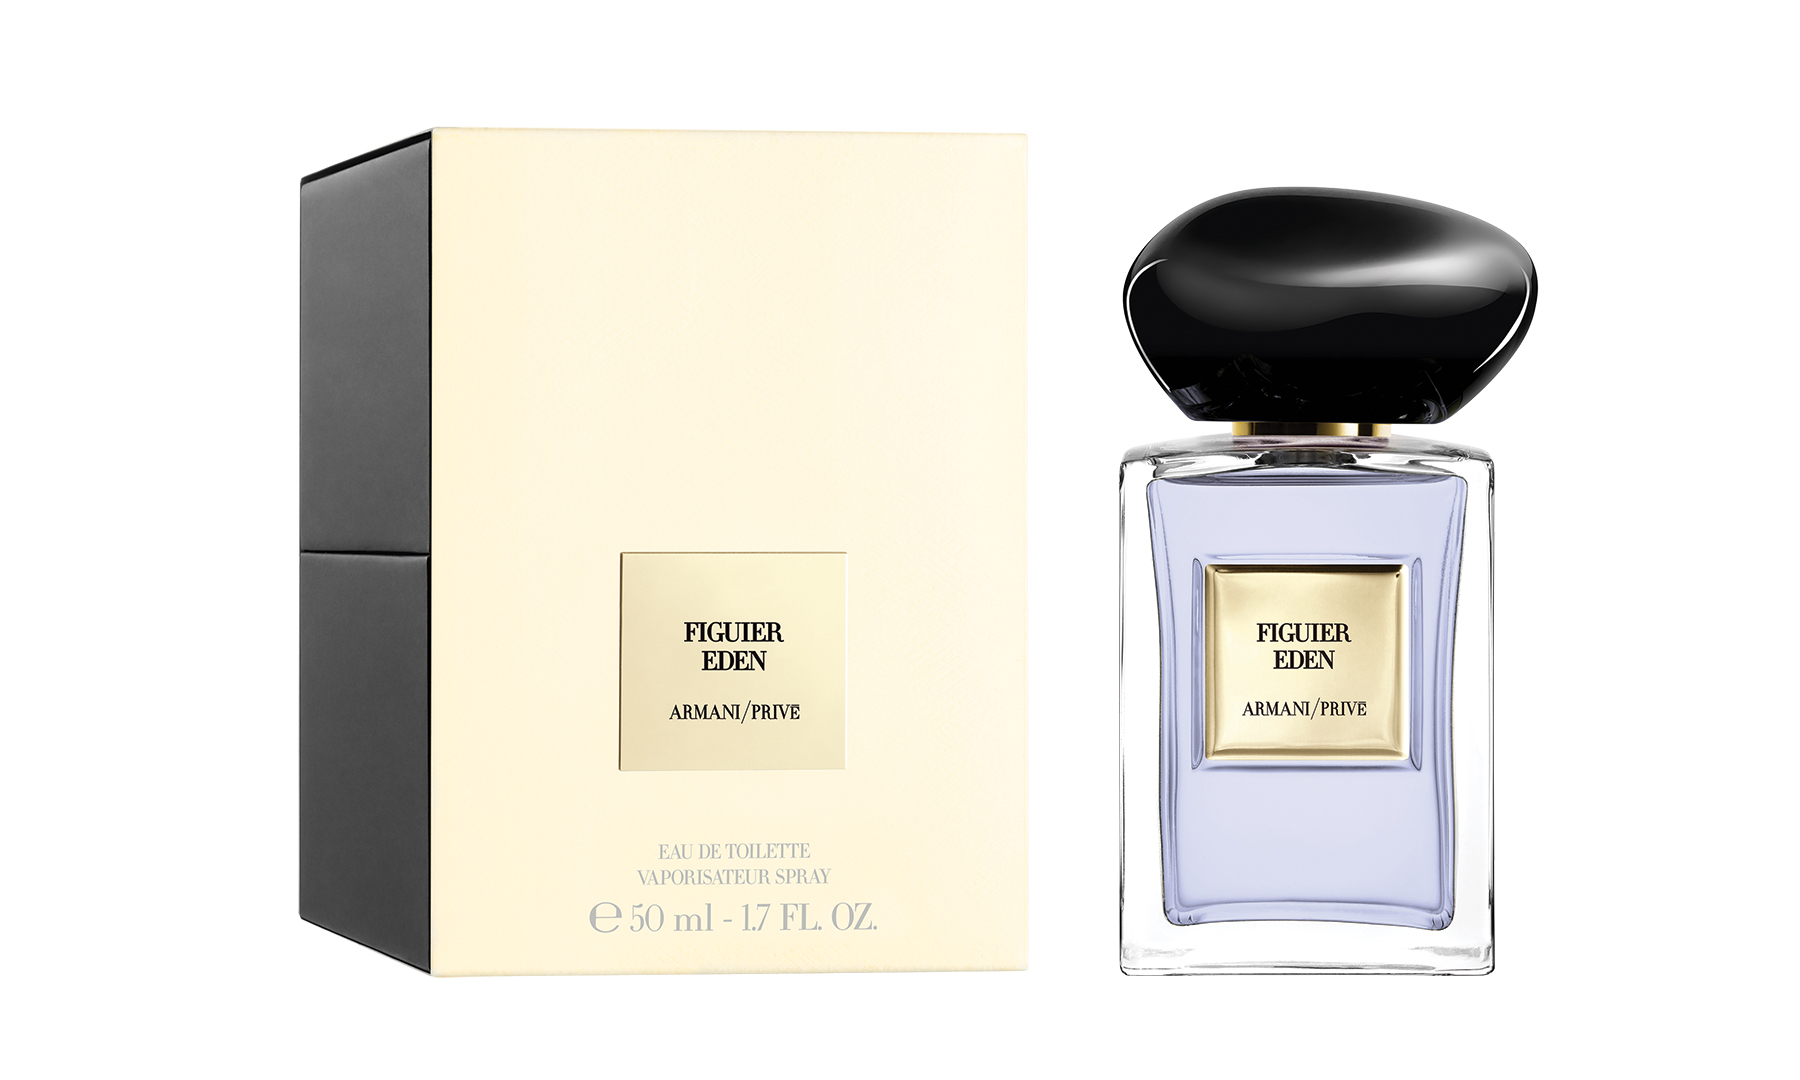 The Most Beautifully Scented Fragrance Gifts - DuJour